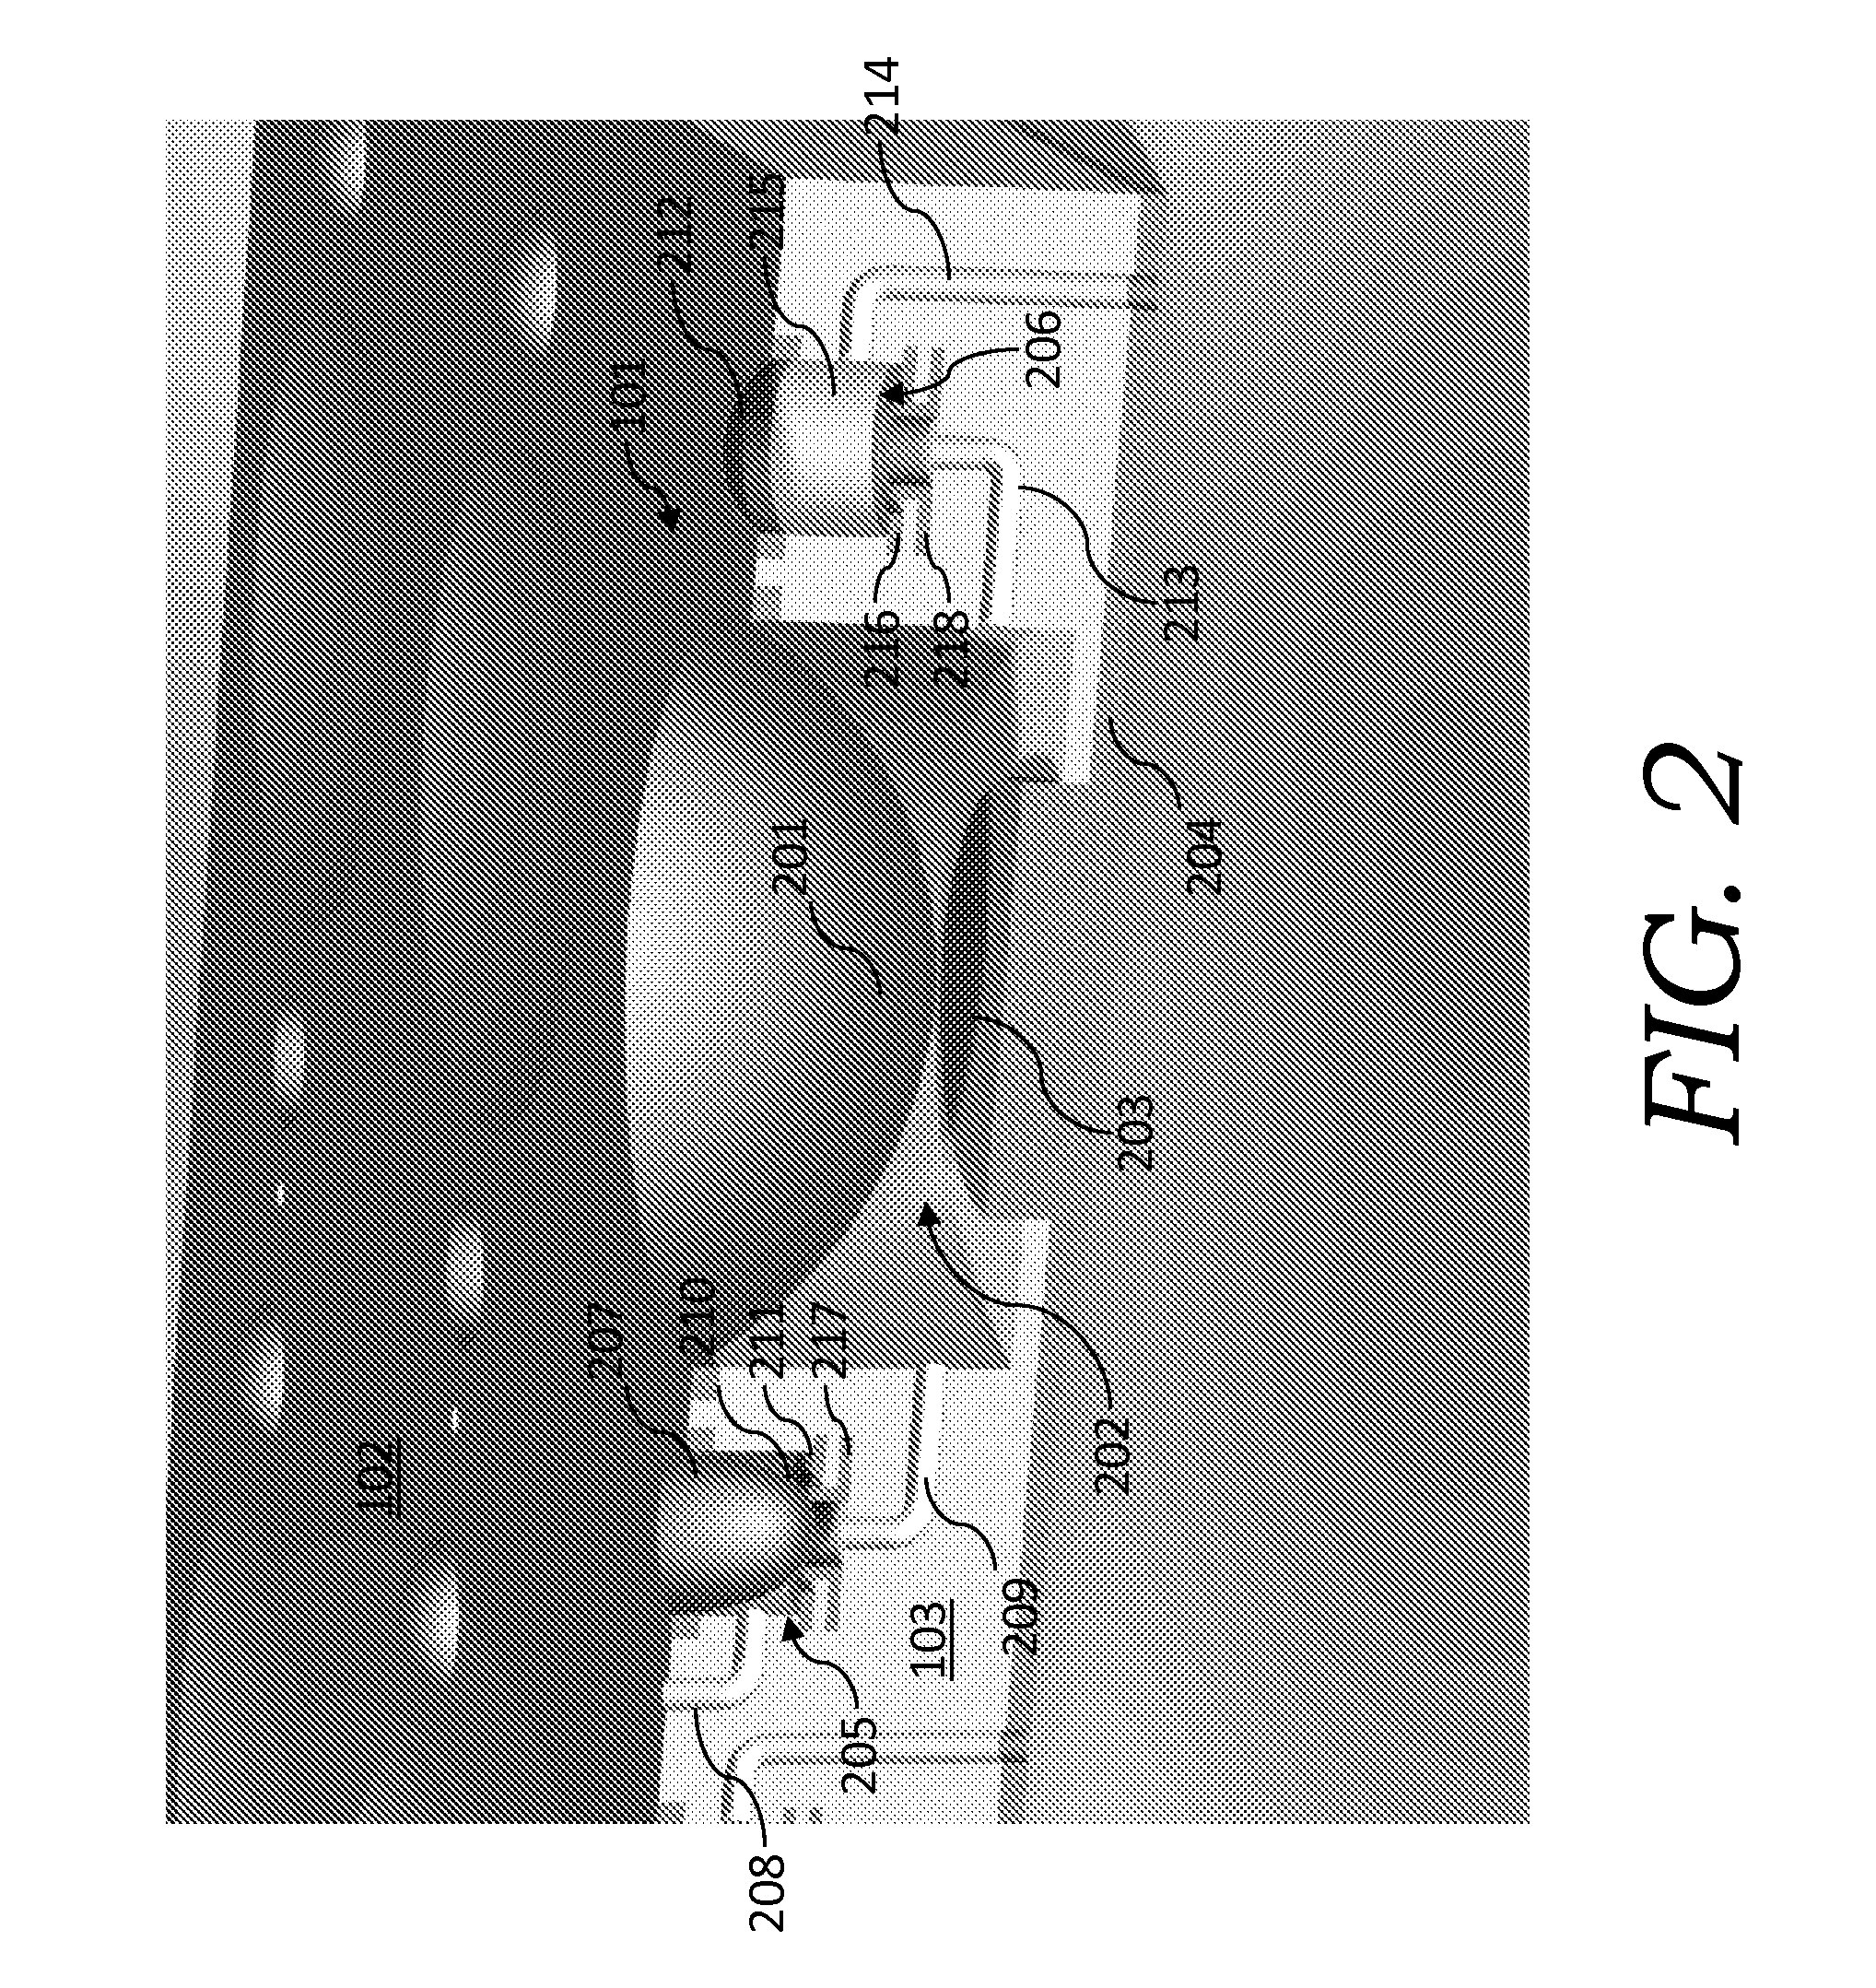 Electrically conductive membrane pump/transducer and methods to make and use same